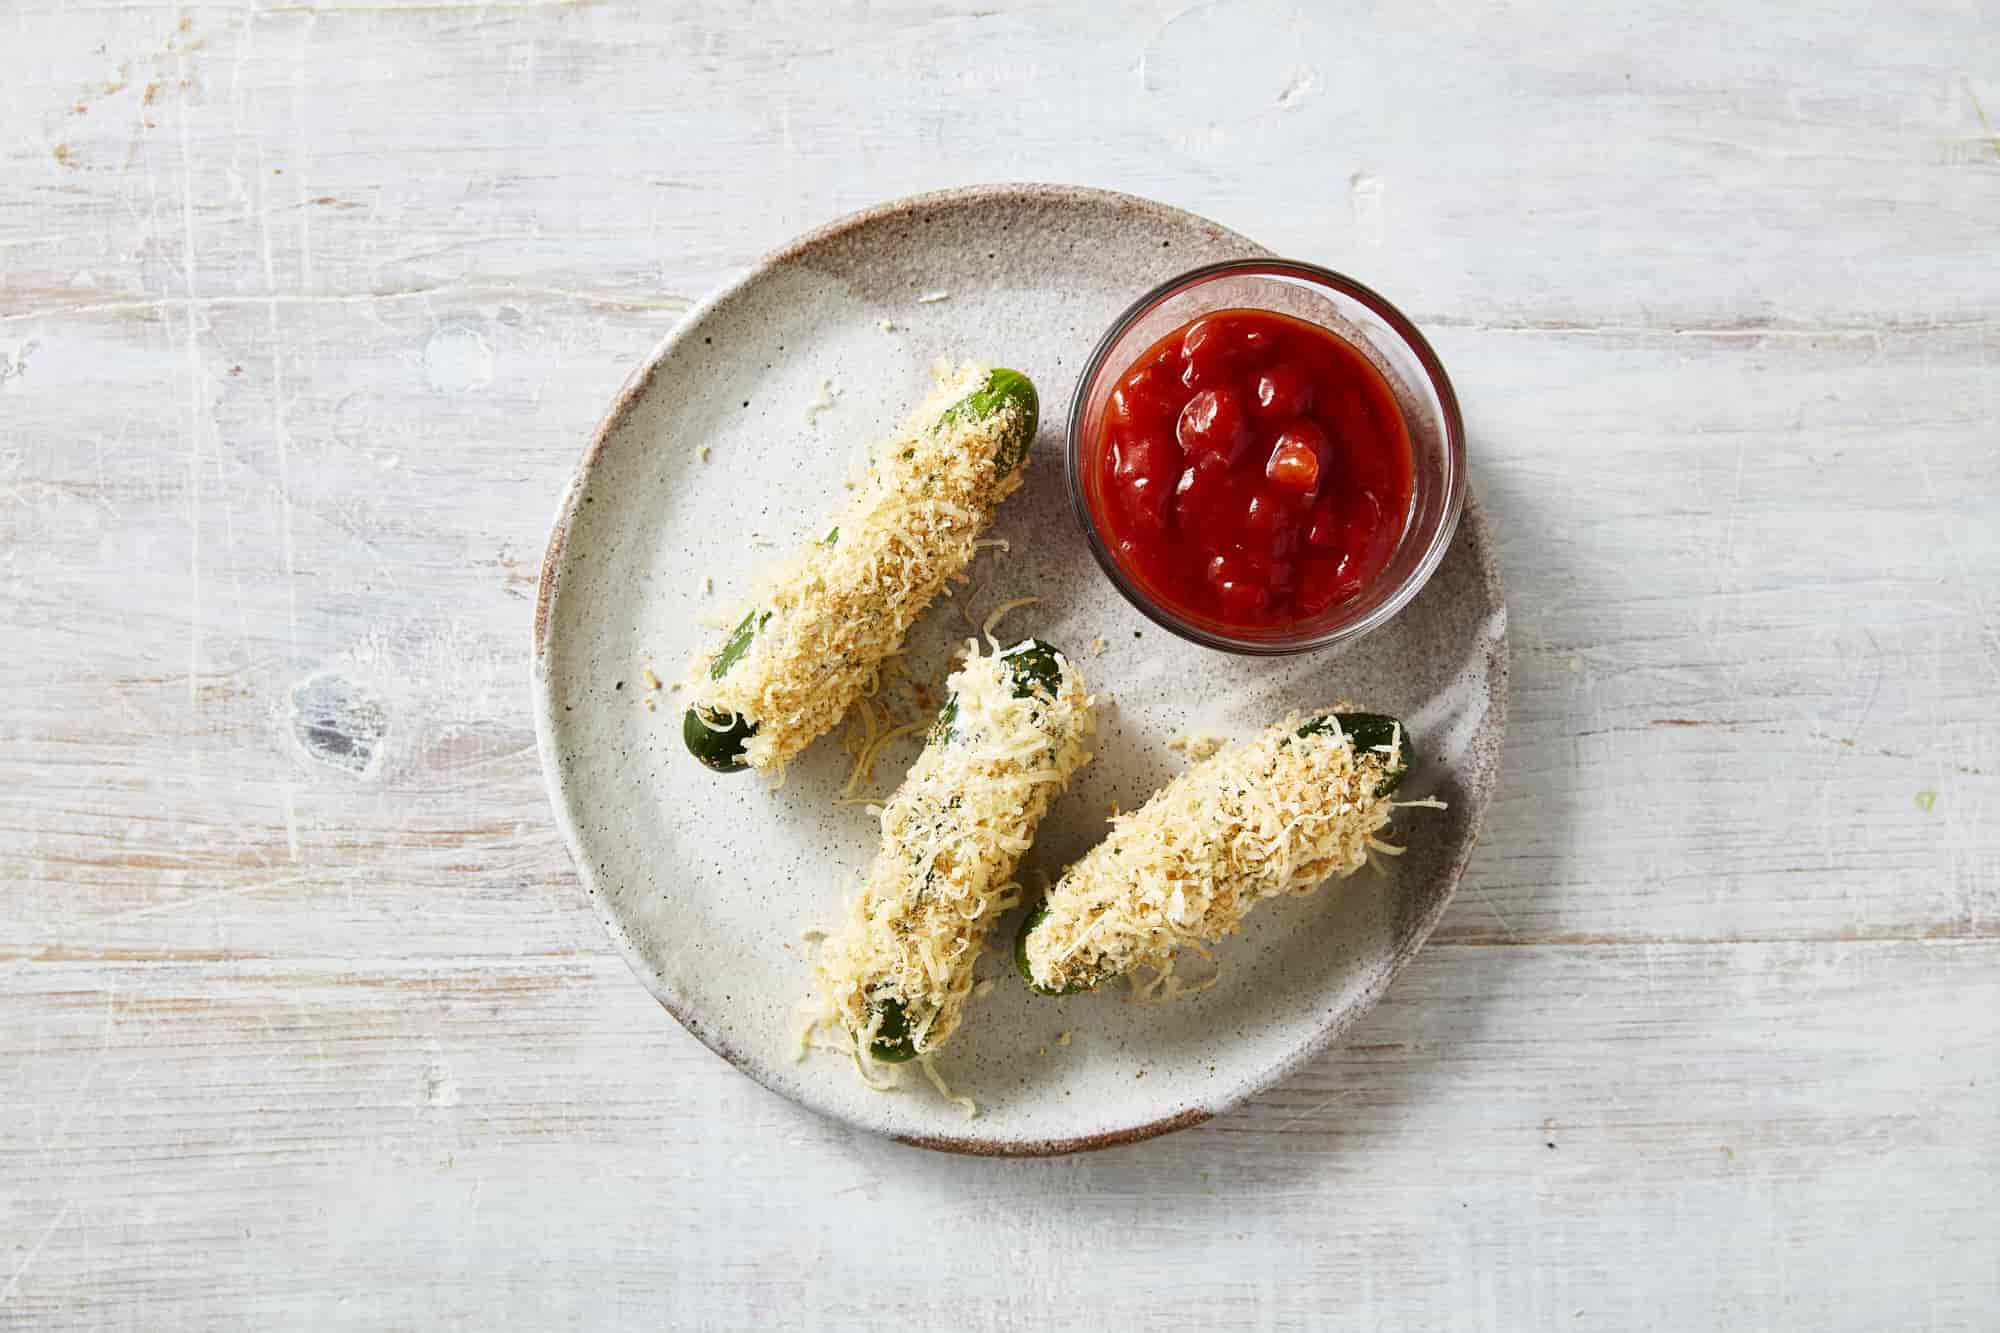 Qukes baby cucumbers rolled in bread crumbs laid out on a plate.